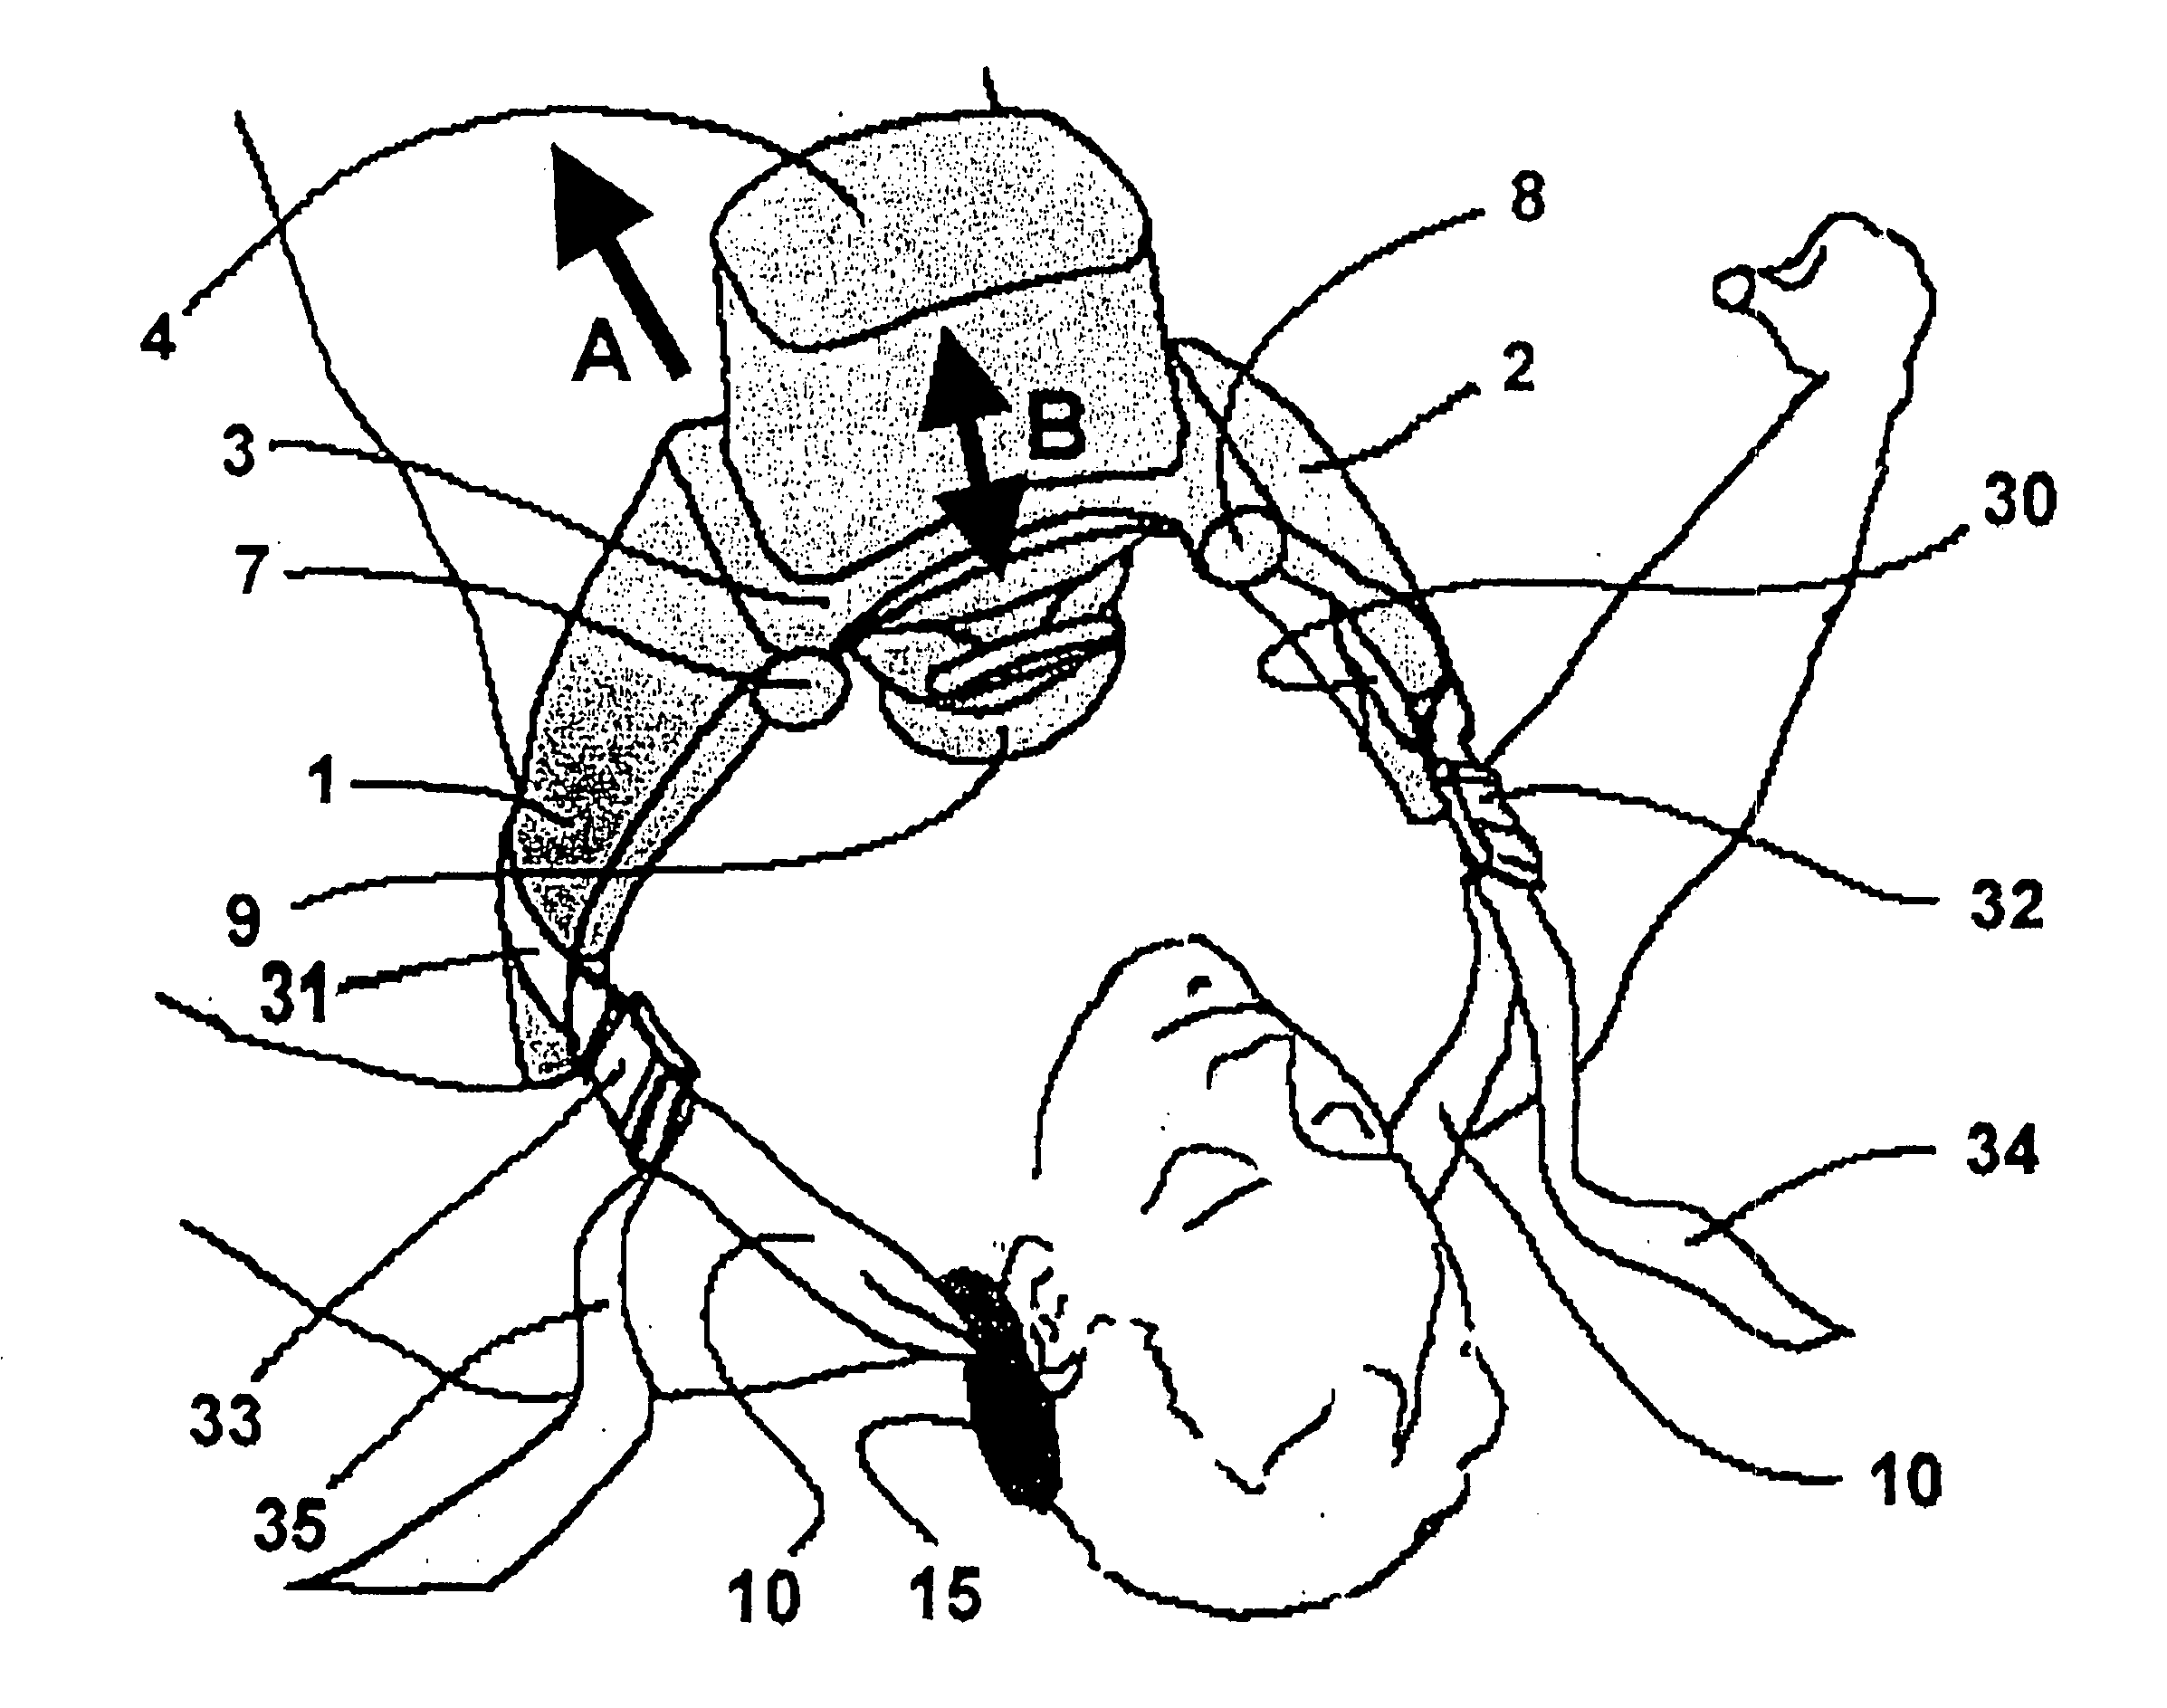 Positioning Device for Use in Apparatus for Treating Sudden Cardiac Arrest